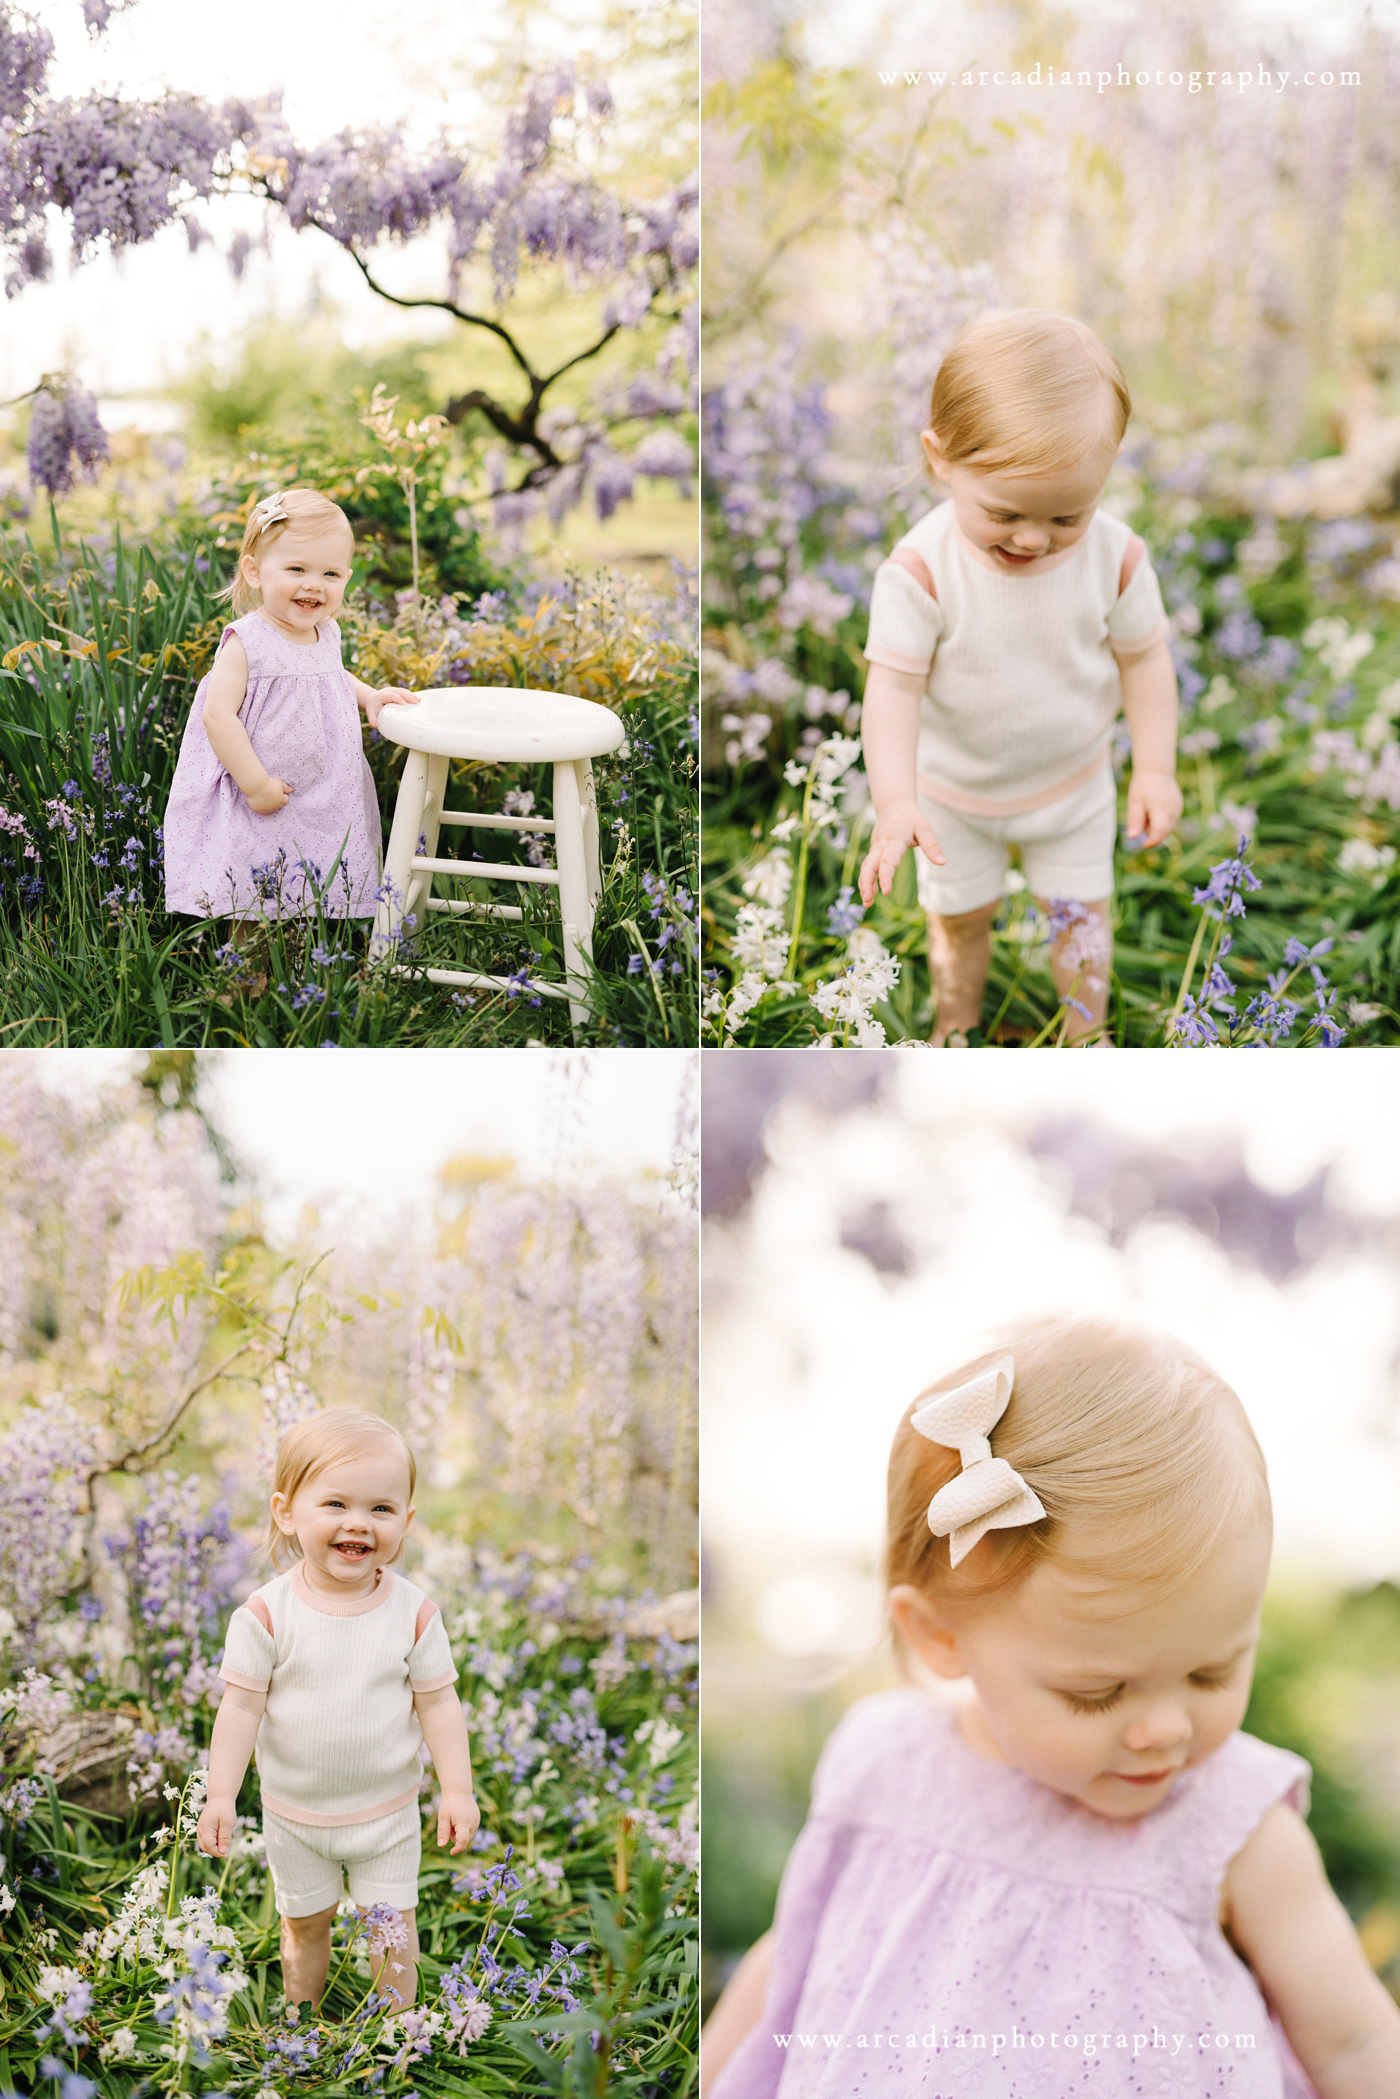 Outdoor spring baby photos at the wisteria in Bush Park